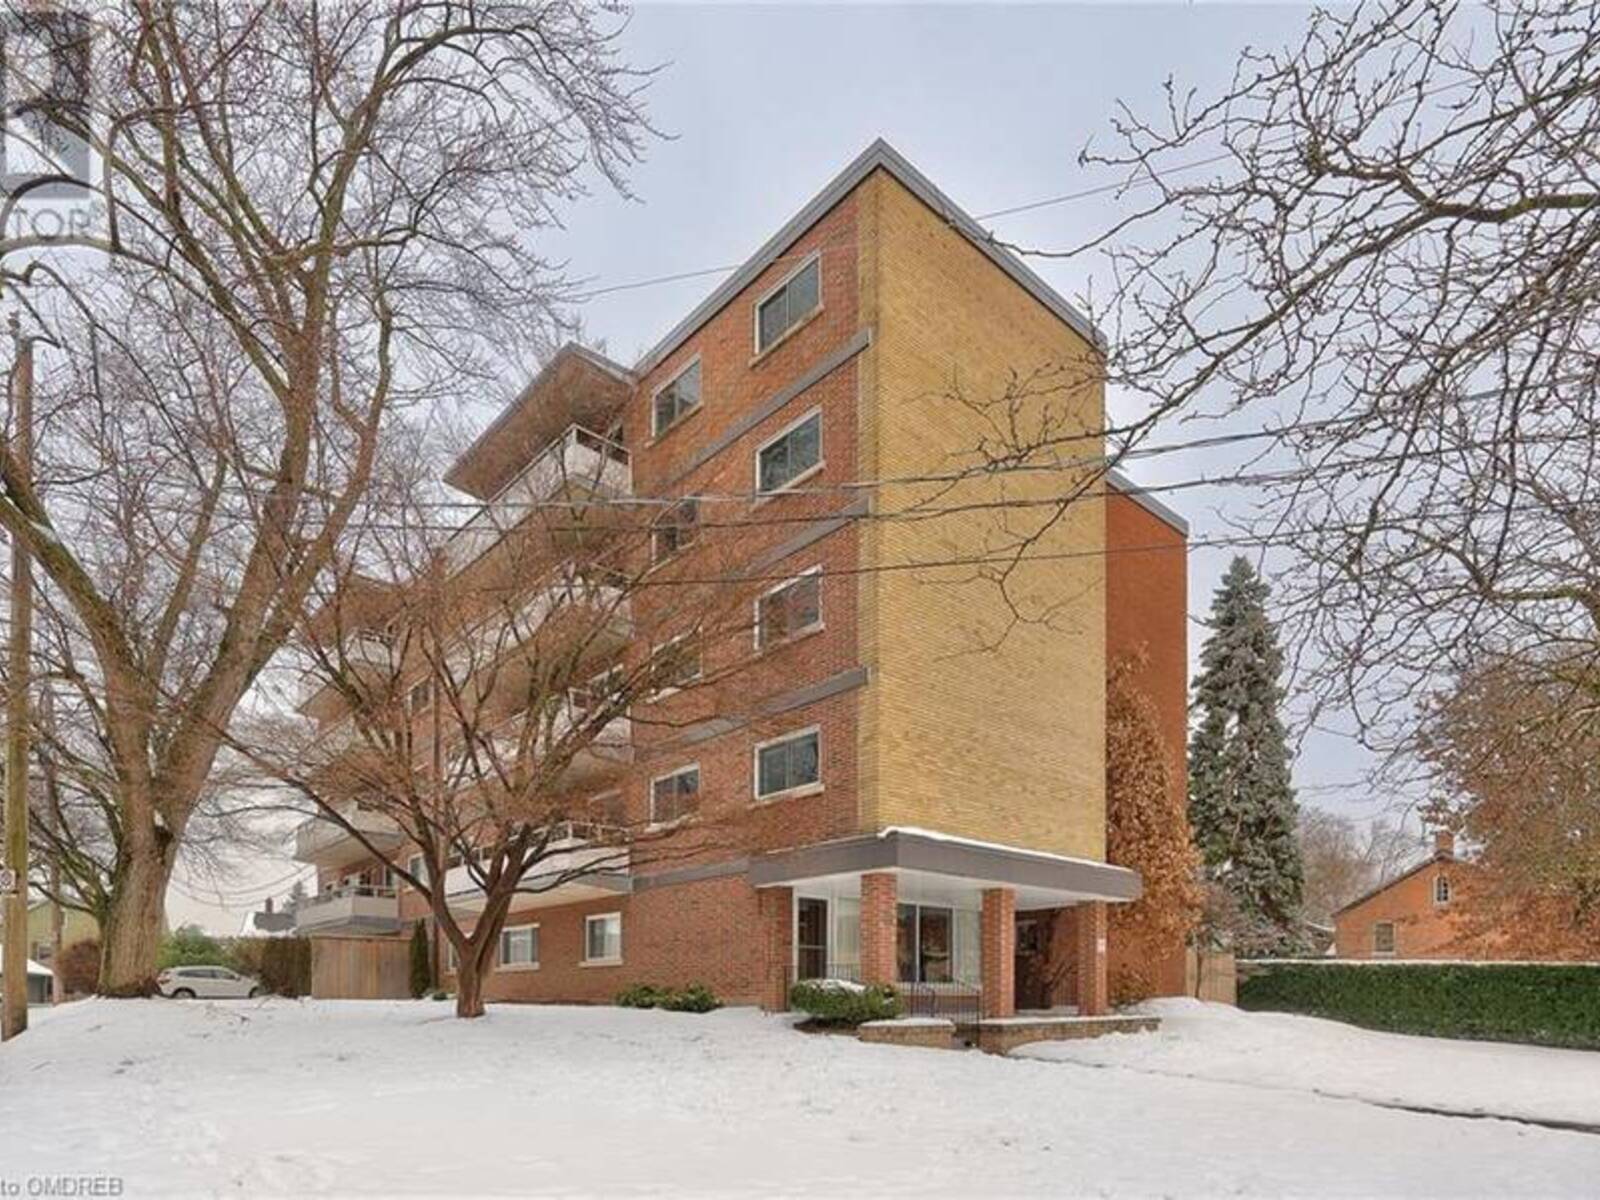 14 NORRIS Place Unit# 103, St. Catharines, Ontario L2R 2W8